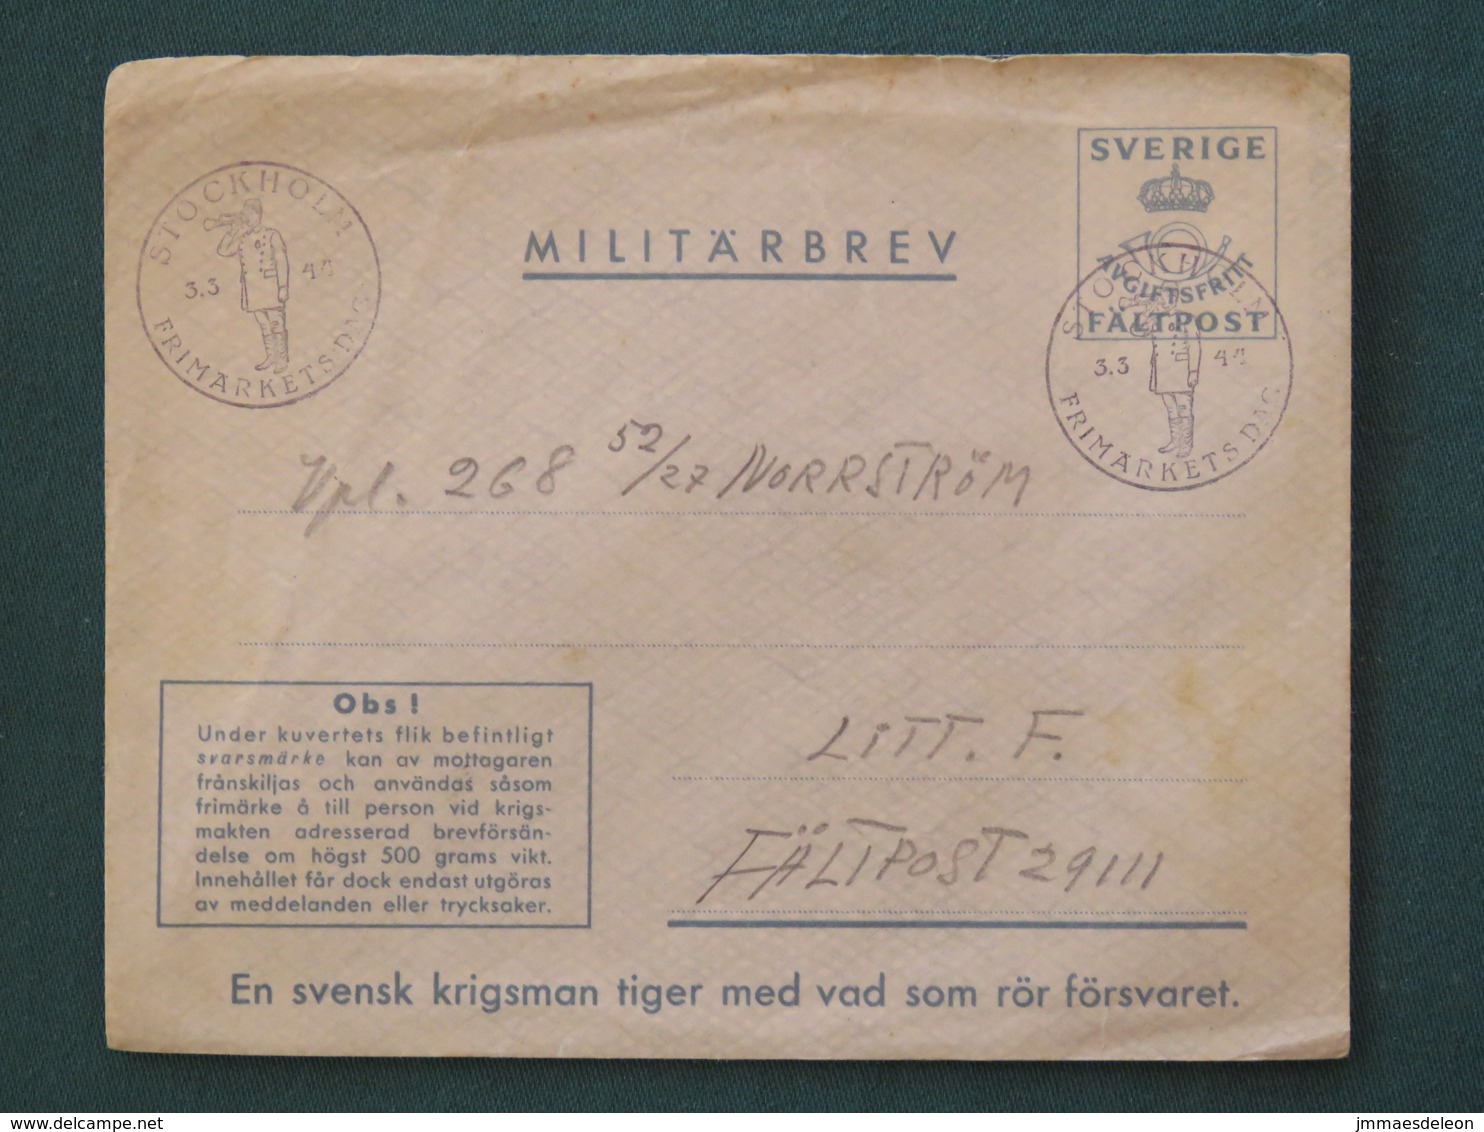 Sweden 1944 FDC Military Army Cover Perhaps Sent From Germany - Military